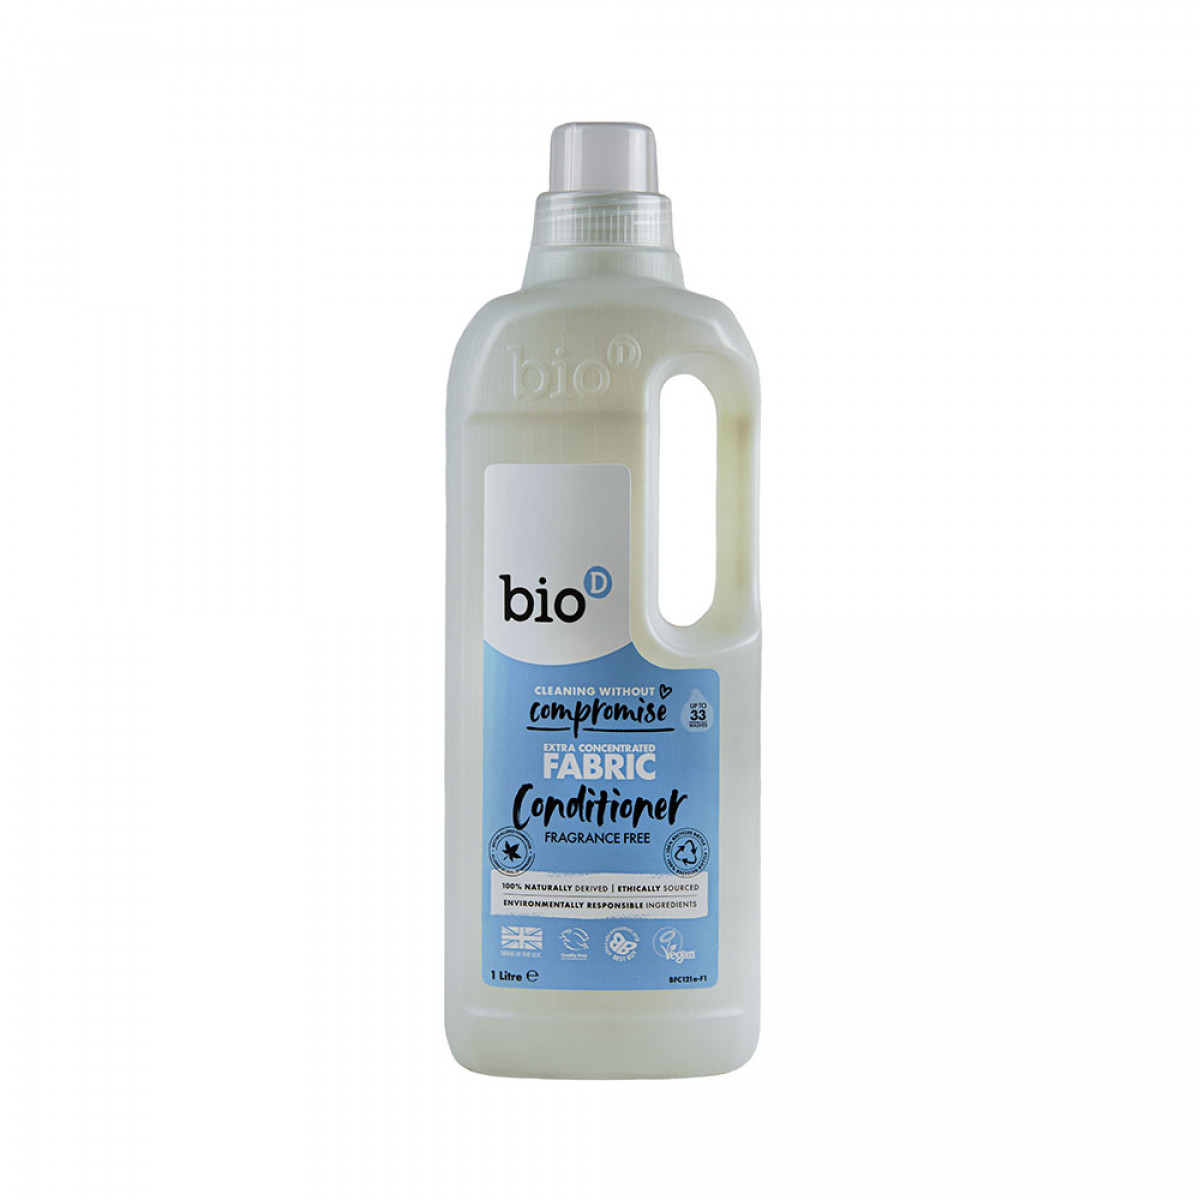 Product picture for Fabric Conditioner